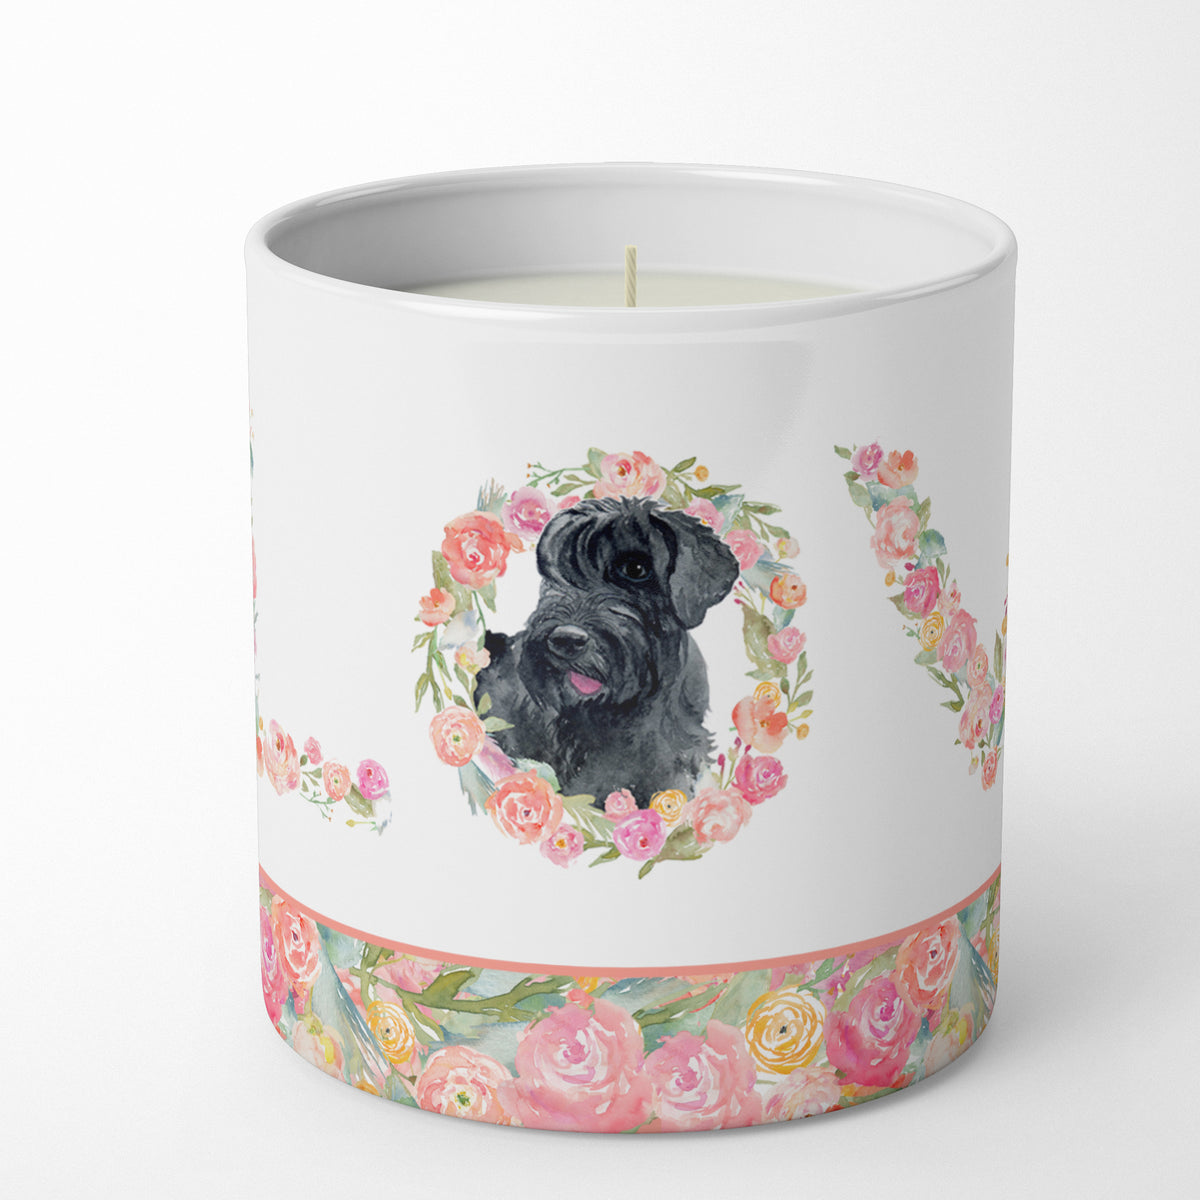 Buy this Giant Schnauzer Love 10 oz Decorative Soy Candle